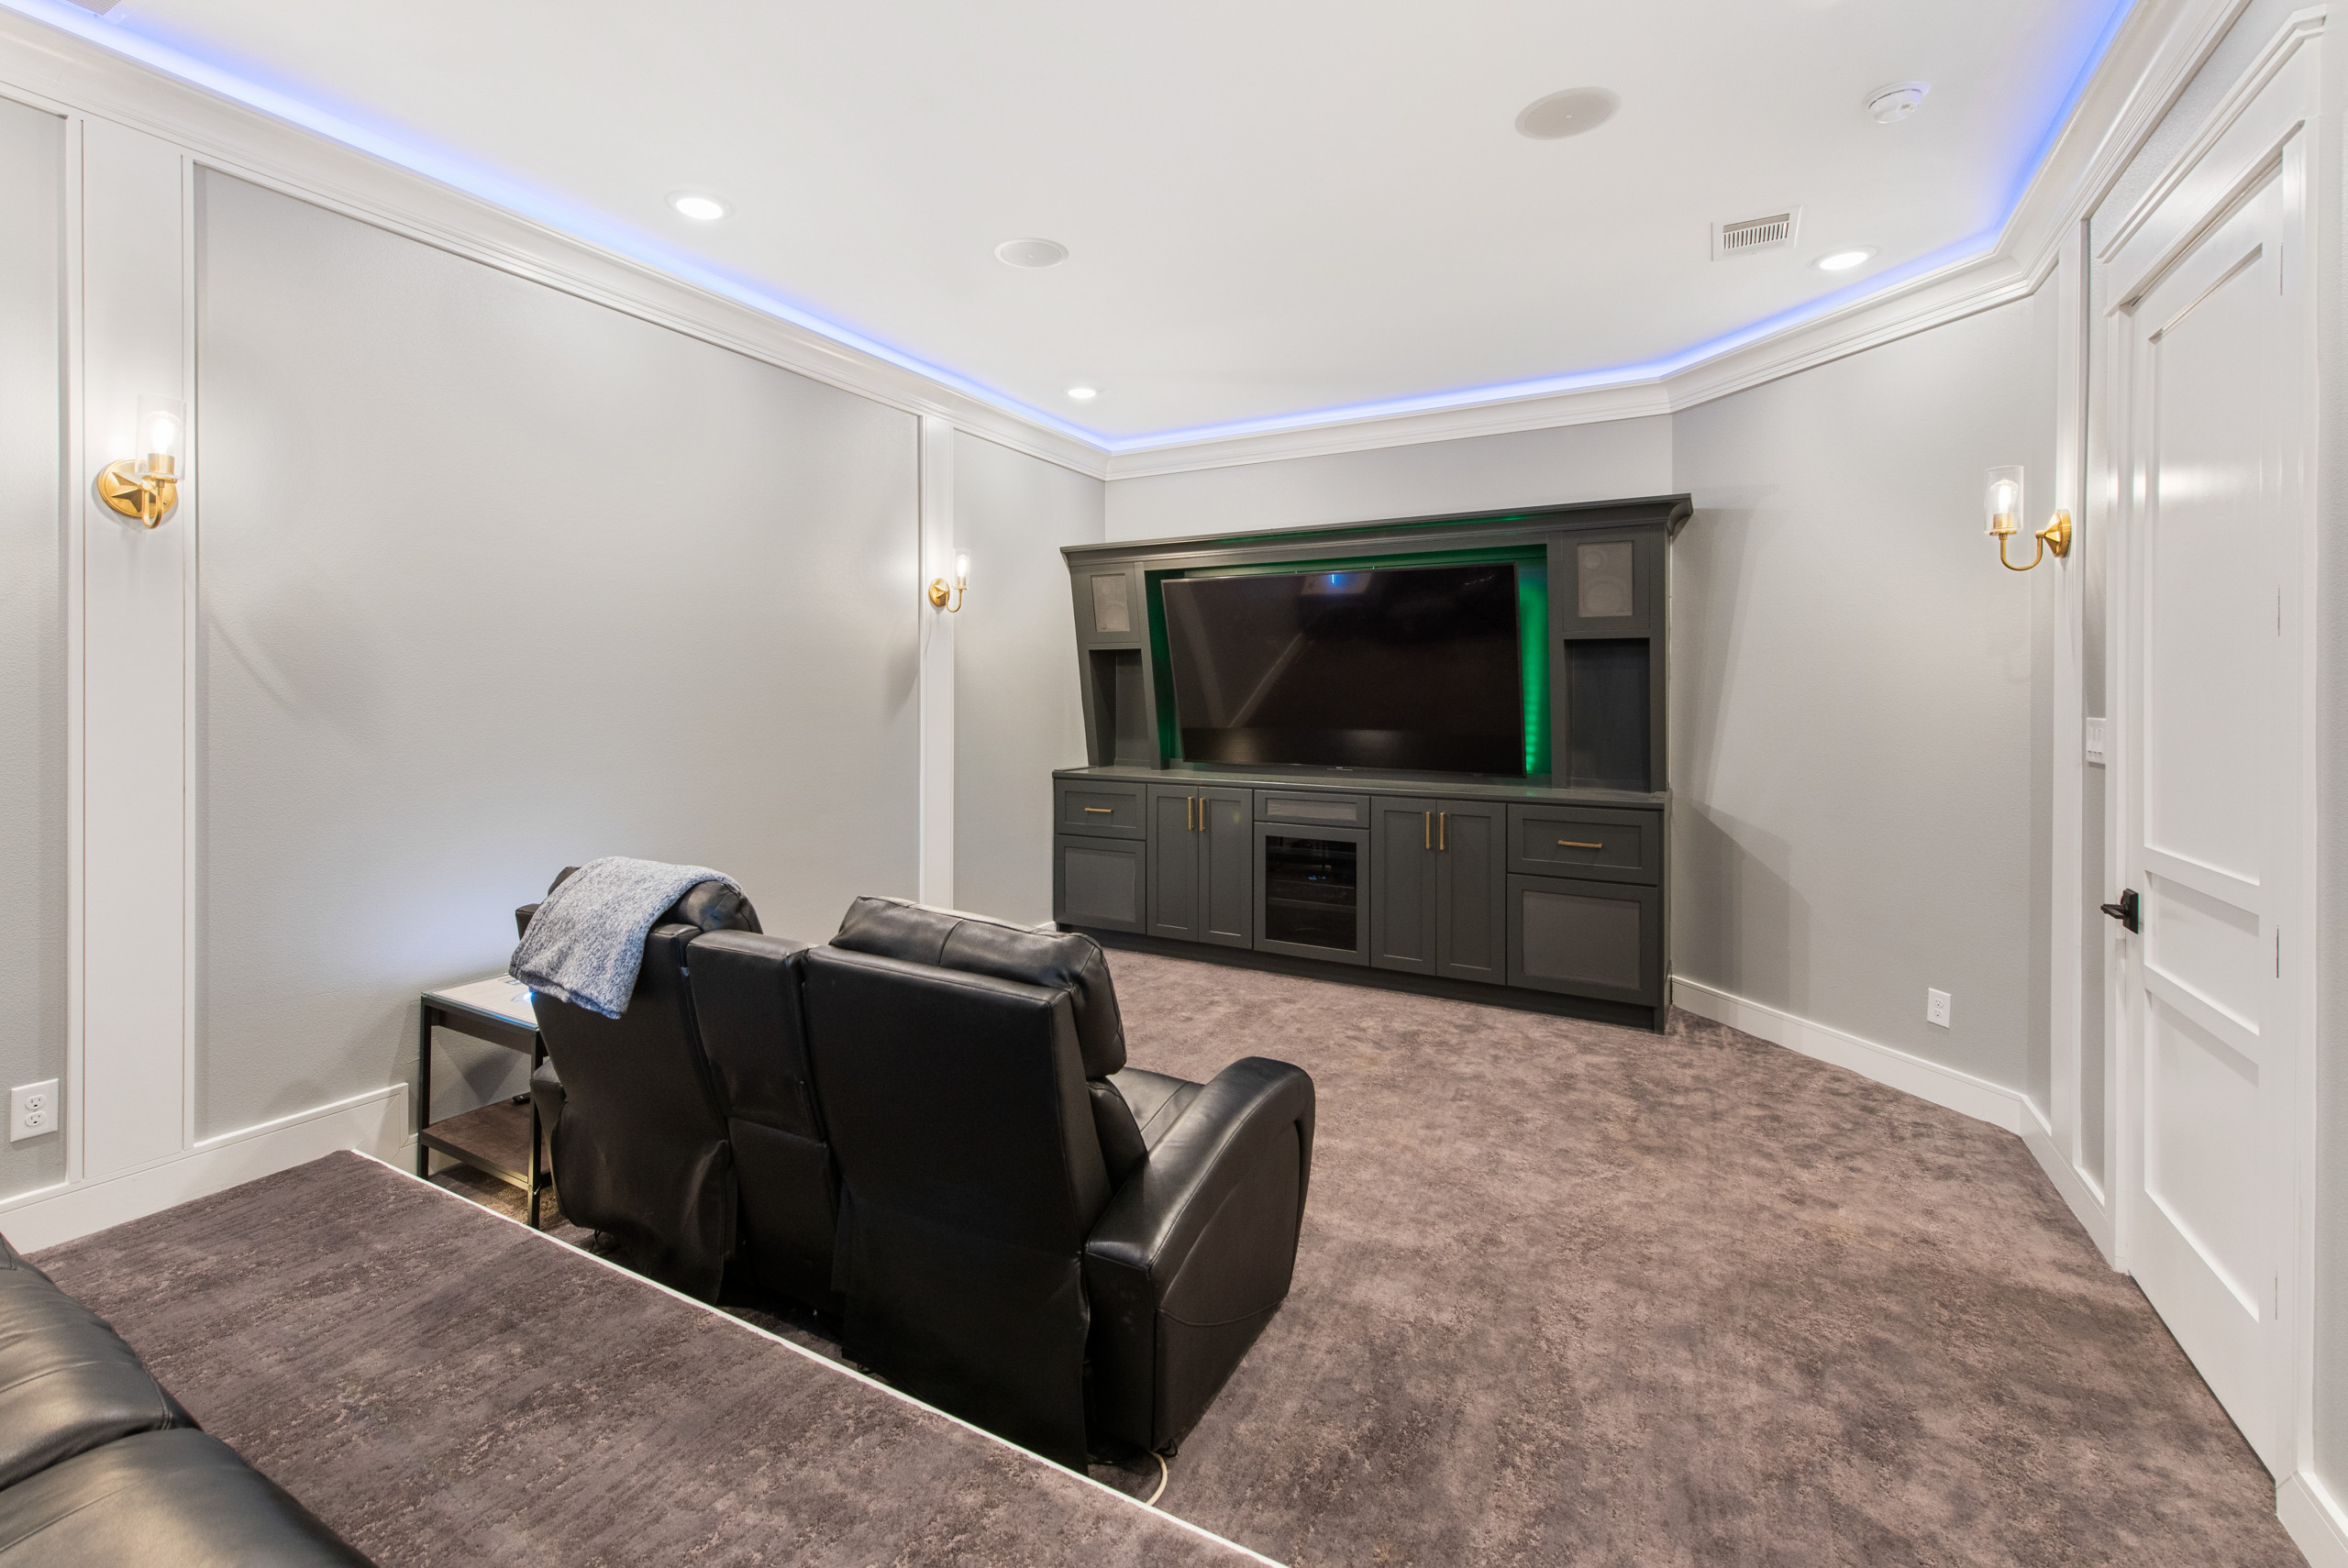 Entertainer's Dream - Home Theater